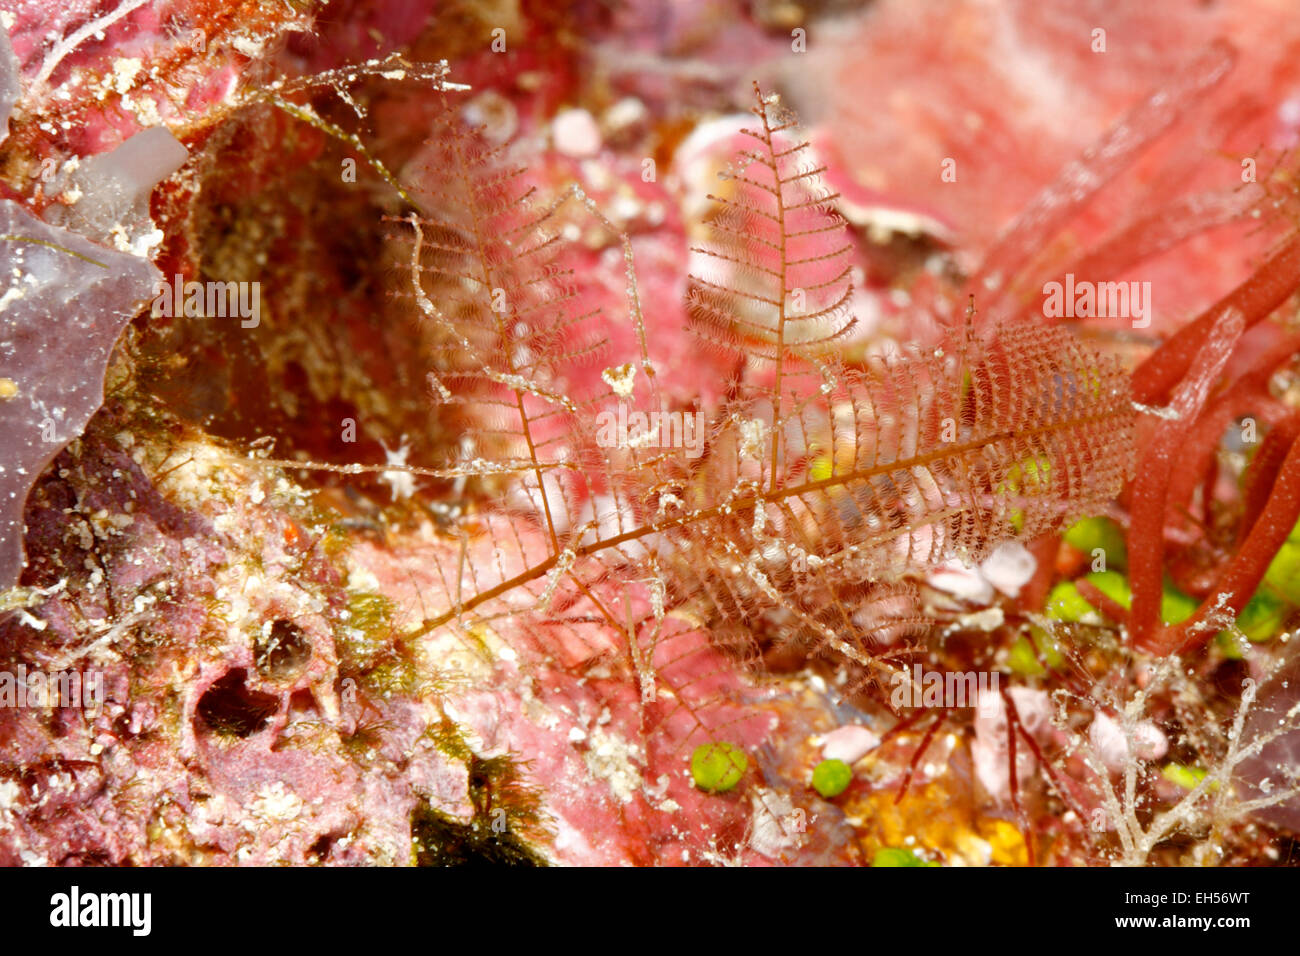 Pycnogonid, or Sea Spider, camouflaged on a hydroid. Stock Photo